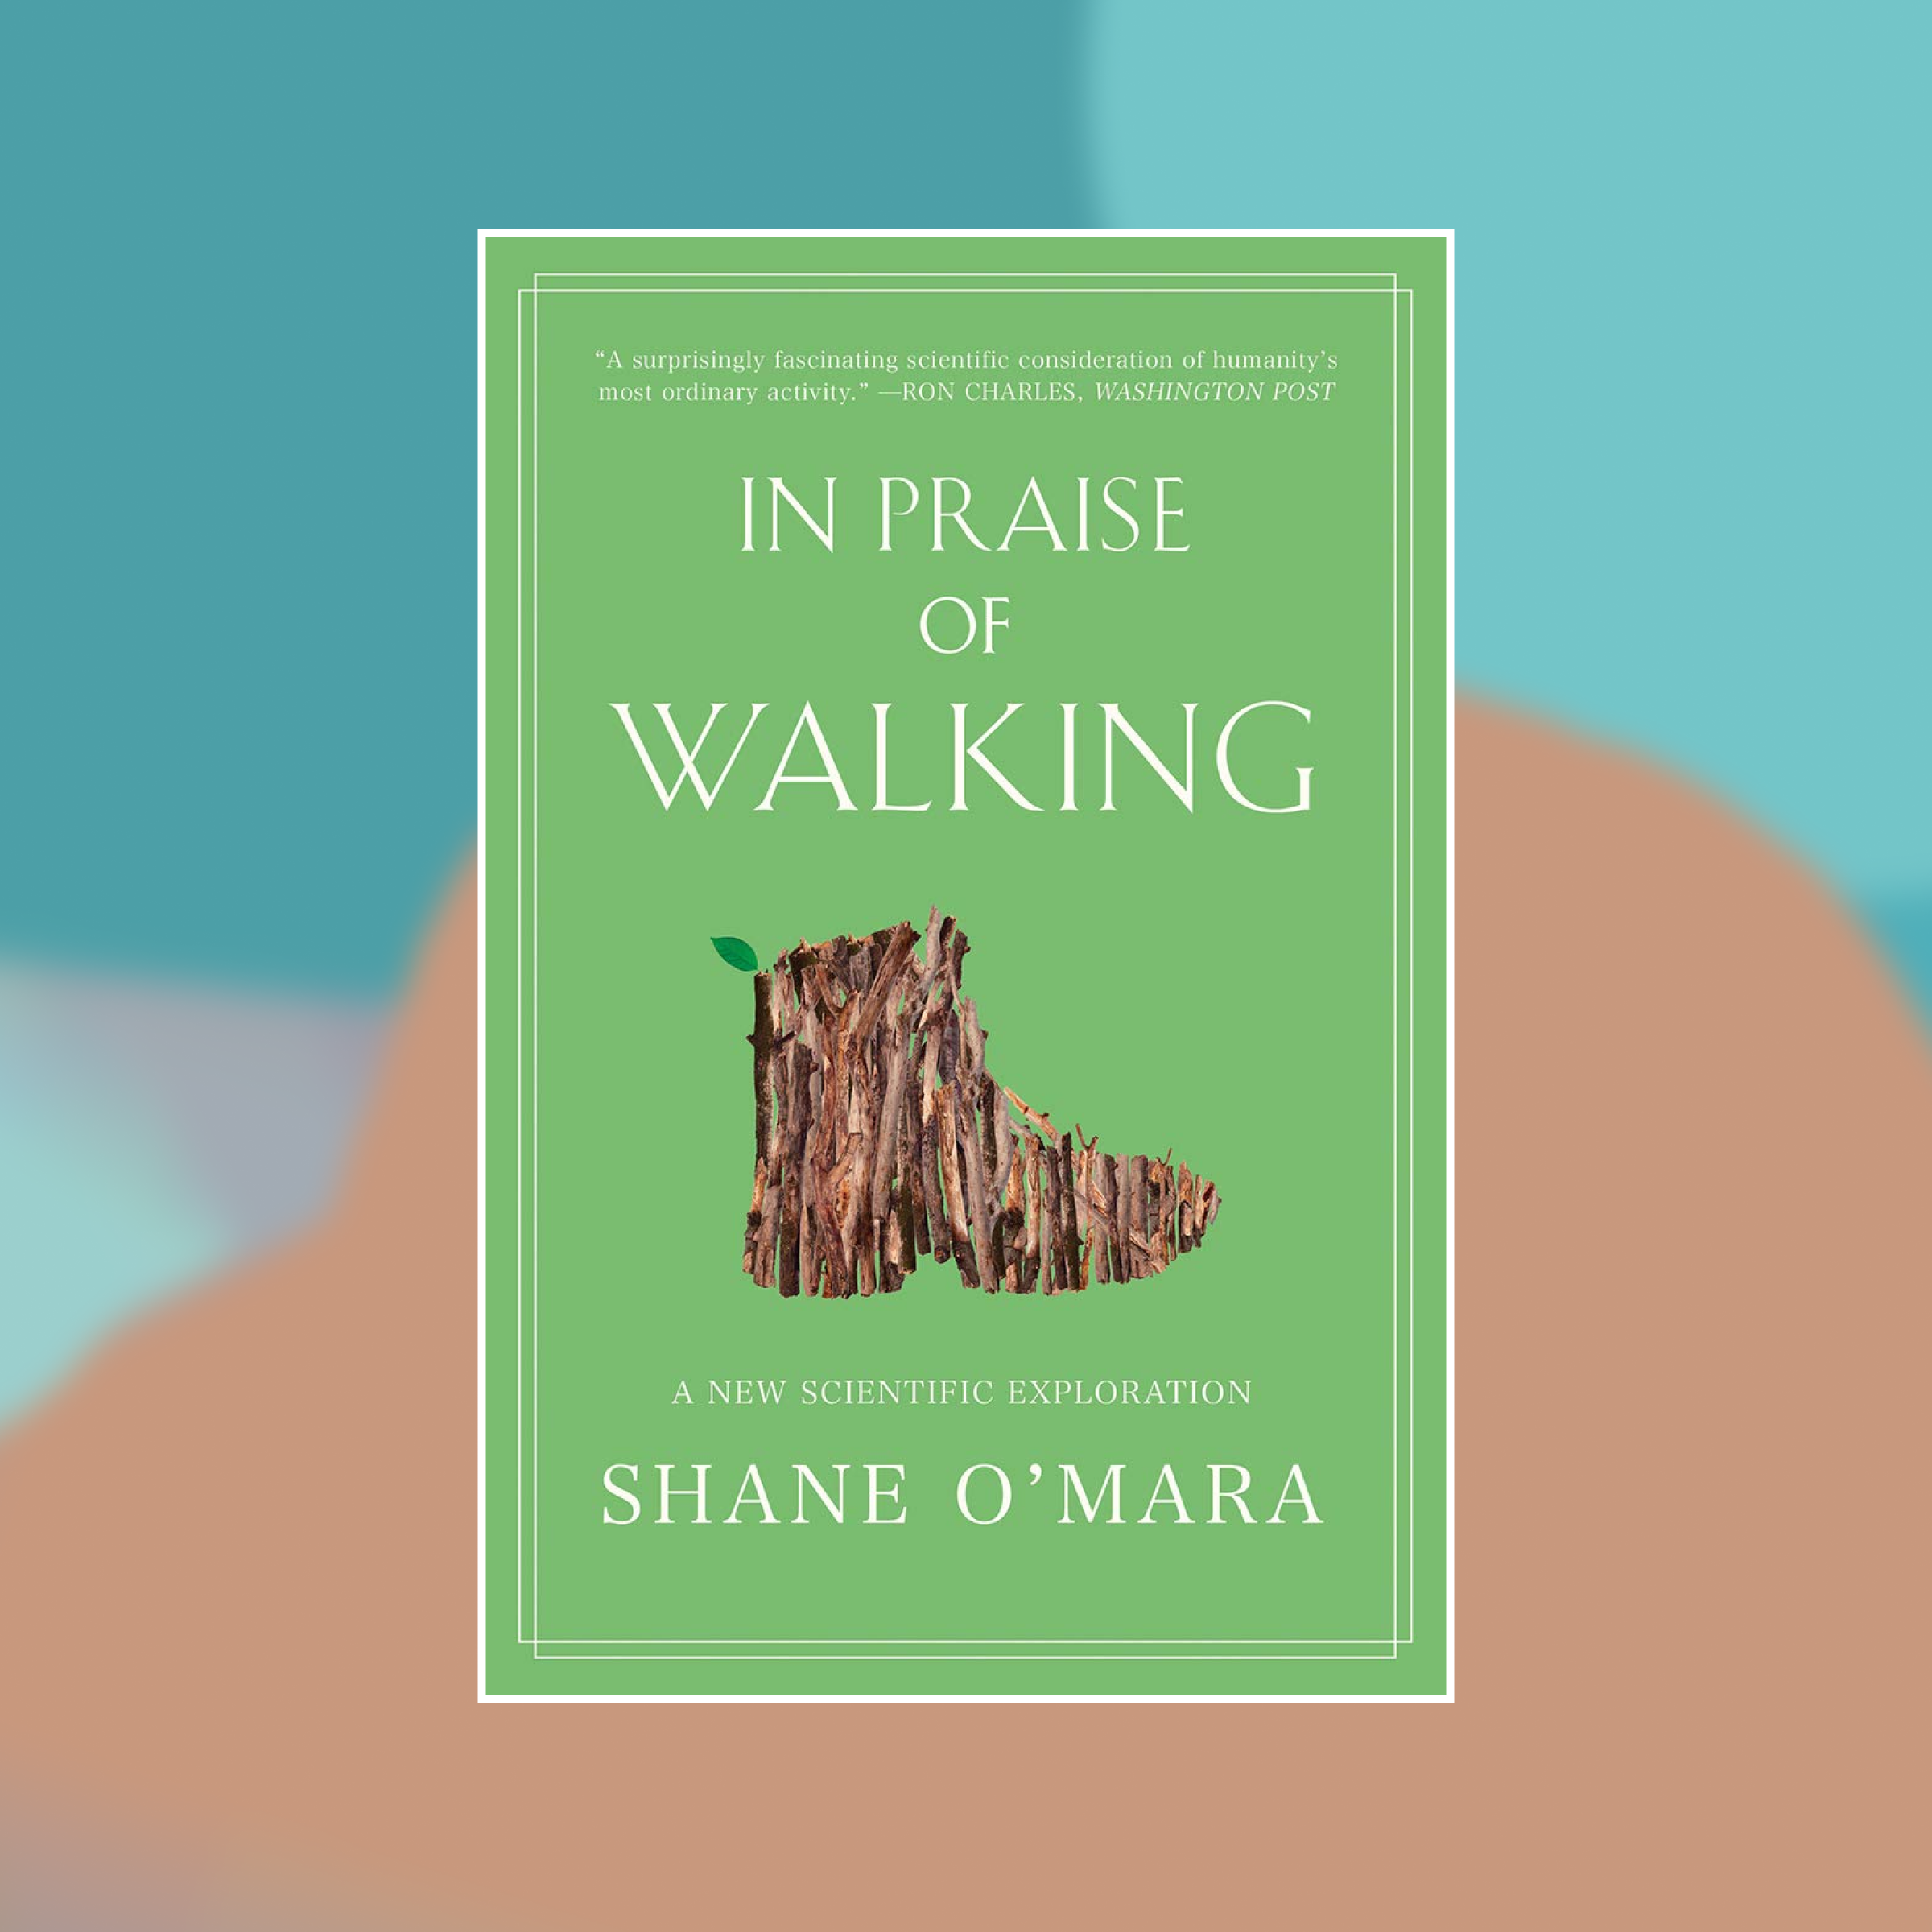 Book cover of In Praise of Walking against an abstract painted background